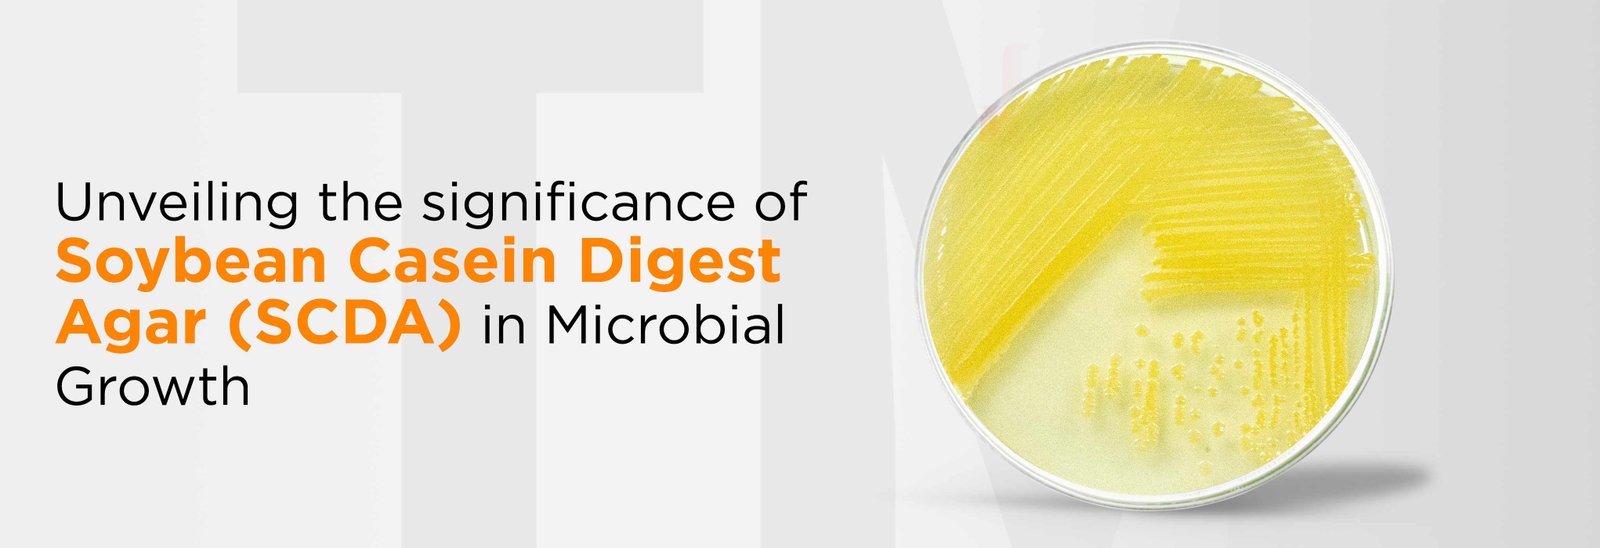 Unveiling the Significance of Soybean Casein Digest Agar (SCDA) in Microbial Growth